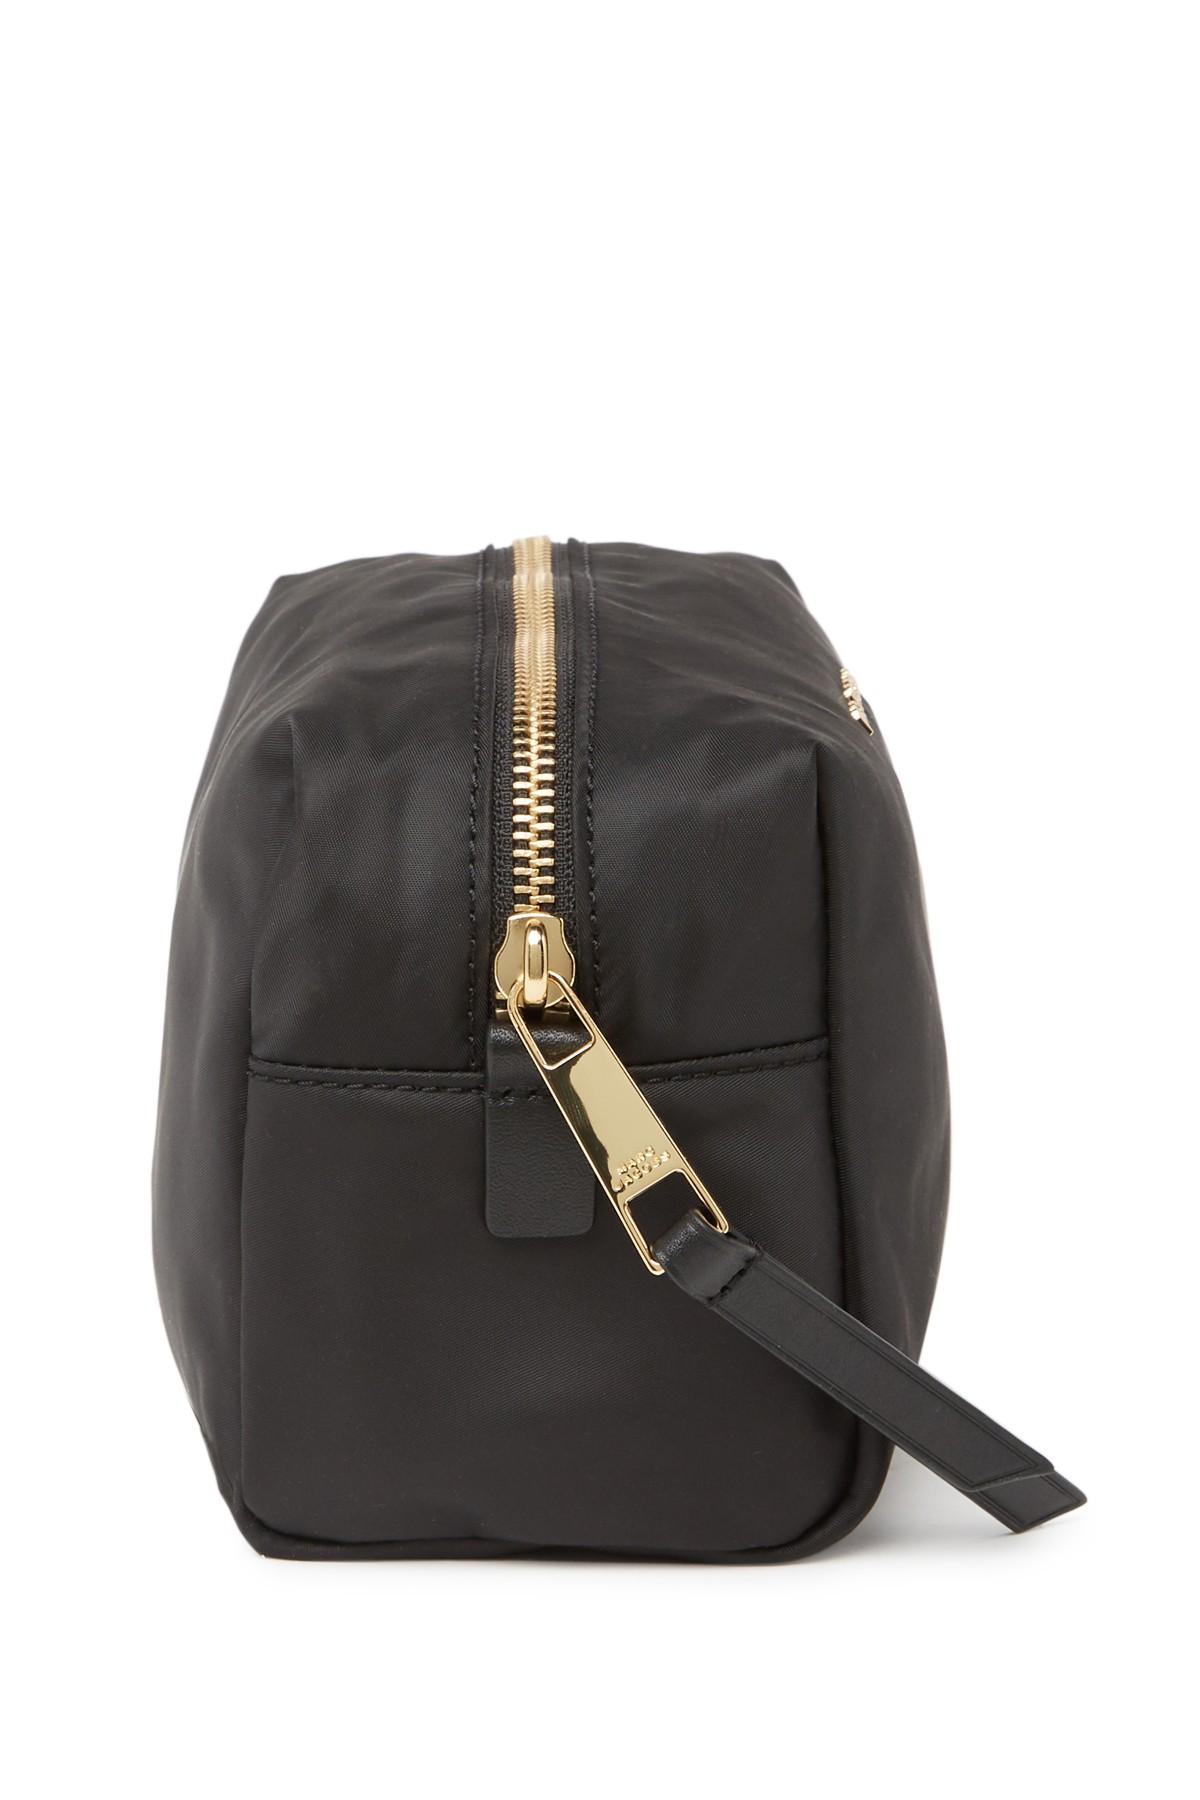 Marc Jacobs Large Cosmetics Bag in Black - Lyst